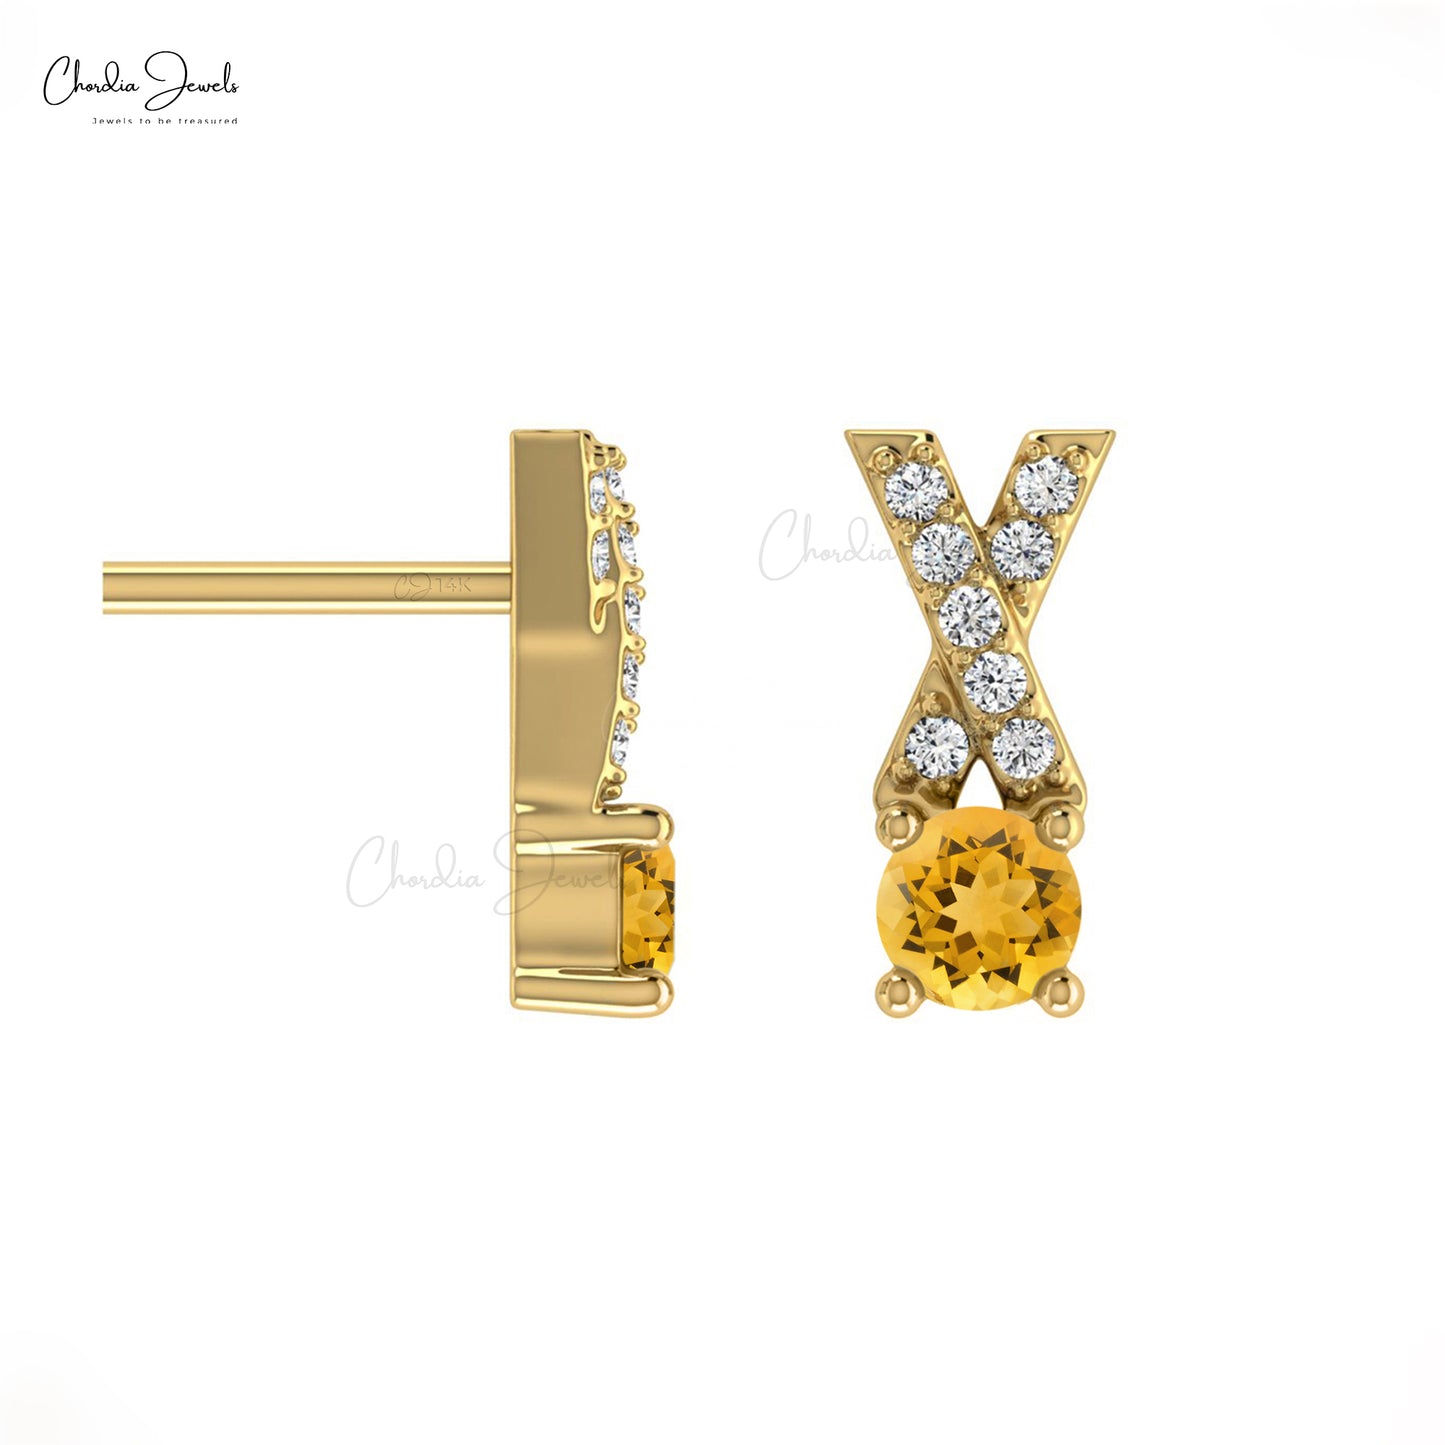 Load image into Gallery viewer, Stunning Natural Citrine Earring14k Solid Gold White Diamond Criss Cross Studs Earring 5mm Round Cut Handmade Gemstone Earrings For Women&amp;#39;s
